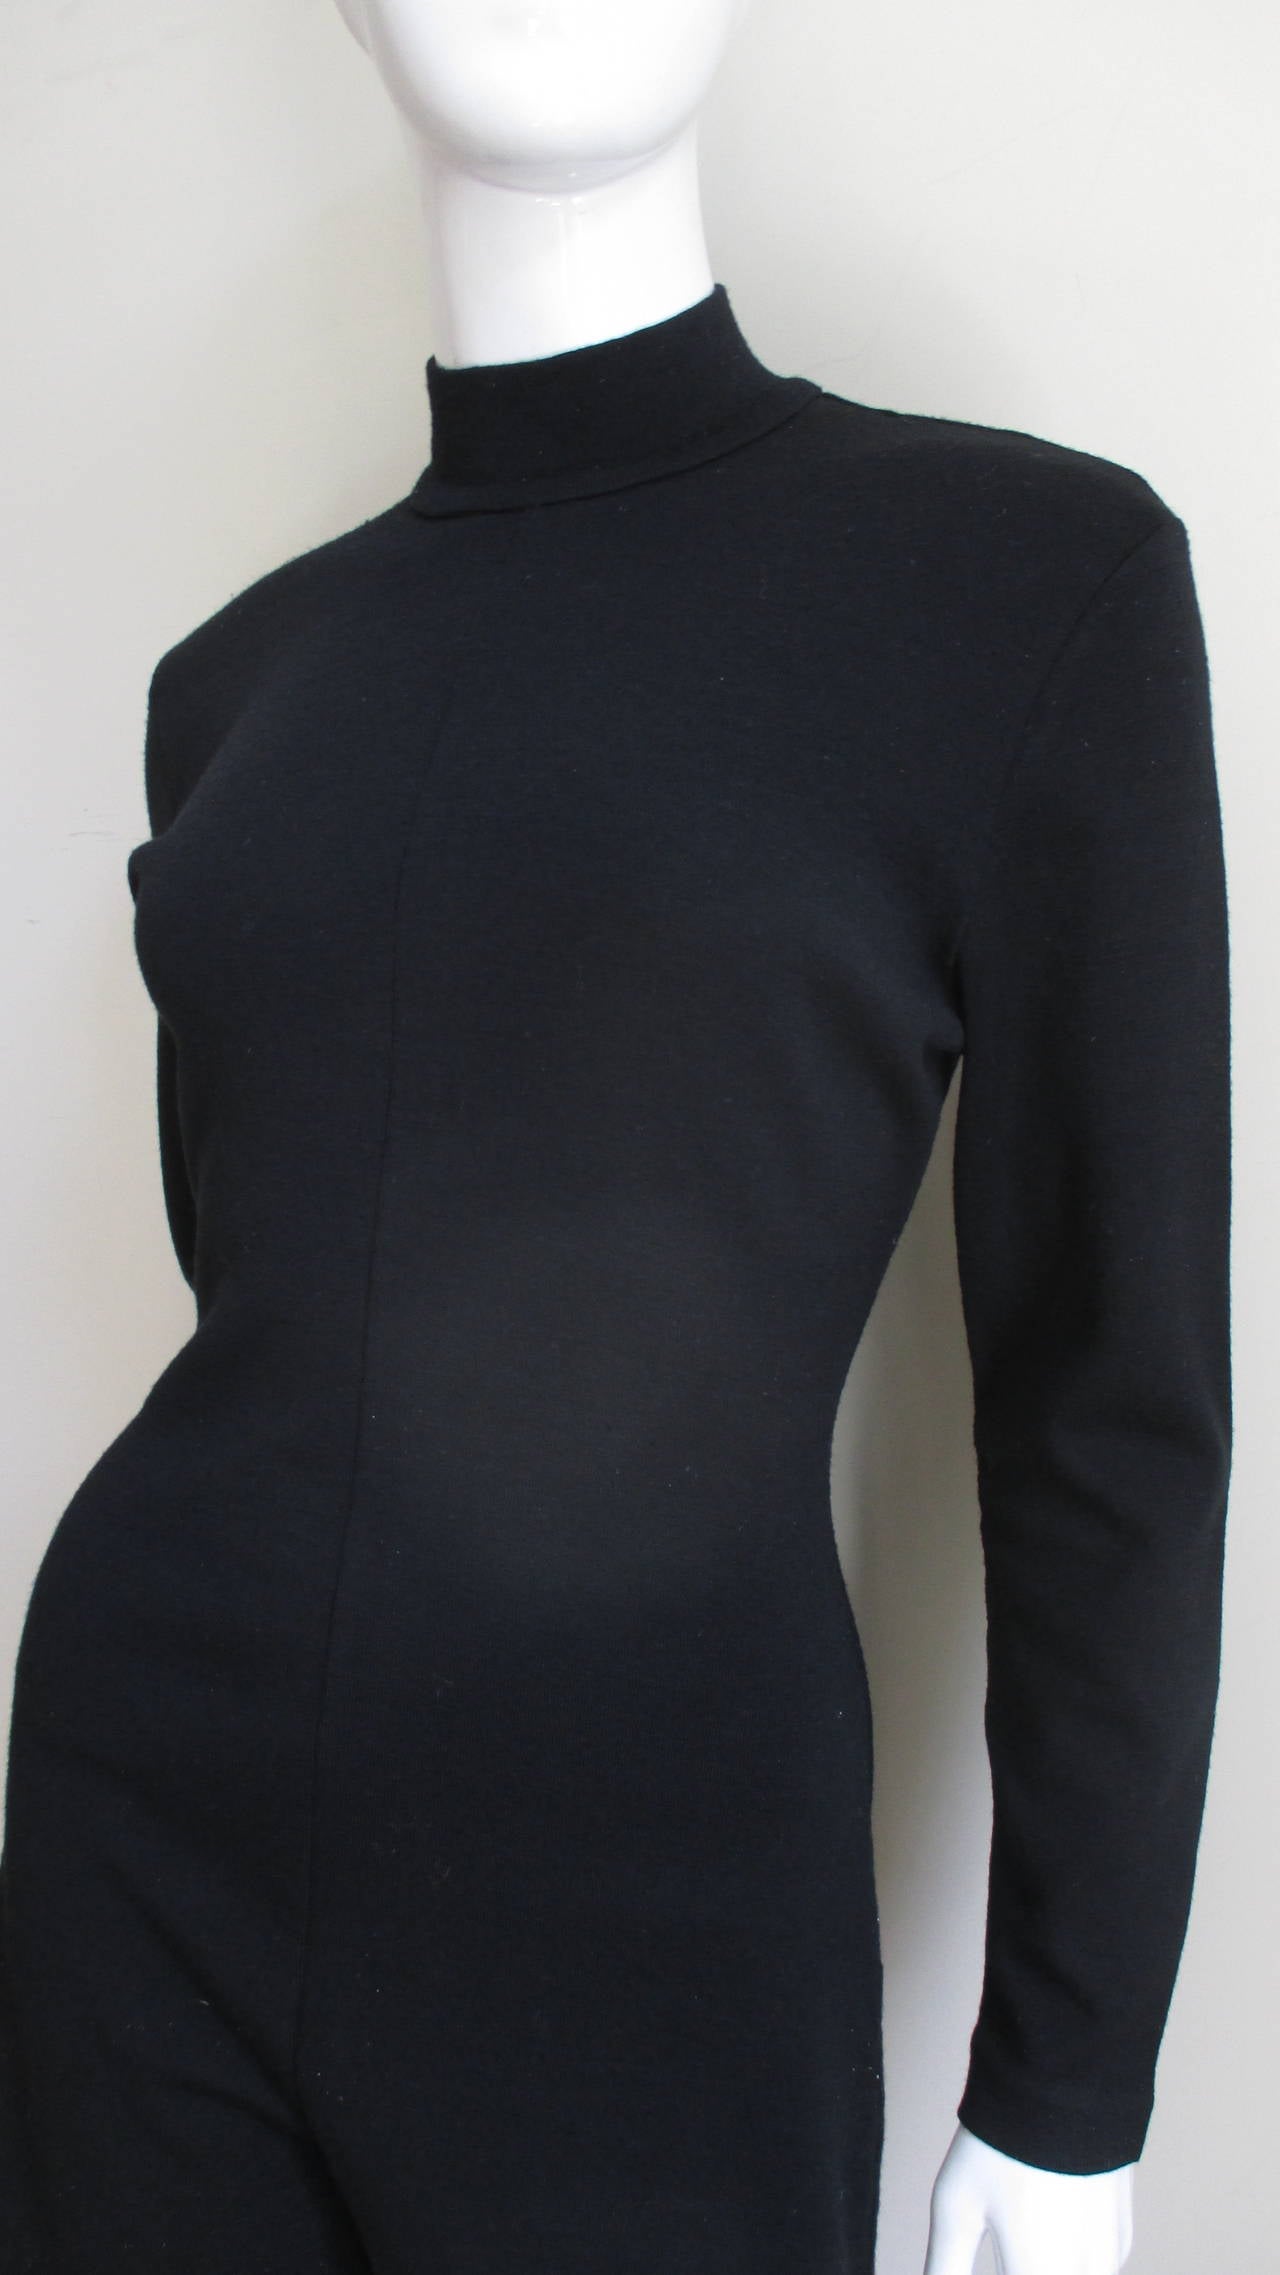 A great Claude Montana black wool jersey shorts jumpsuit with long sleeves and a stand up collar.  It has a back zipper and is unlined.
Sizes Extra Small, Small, Medium.

Bust  34-36